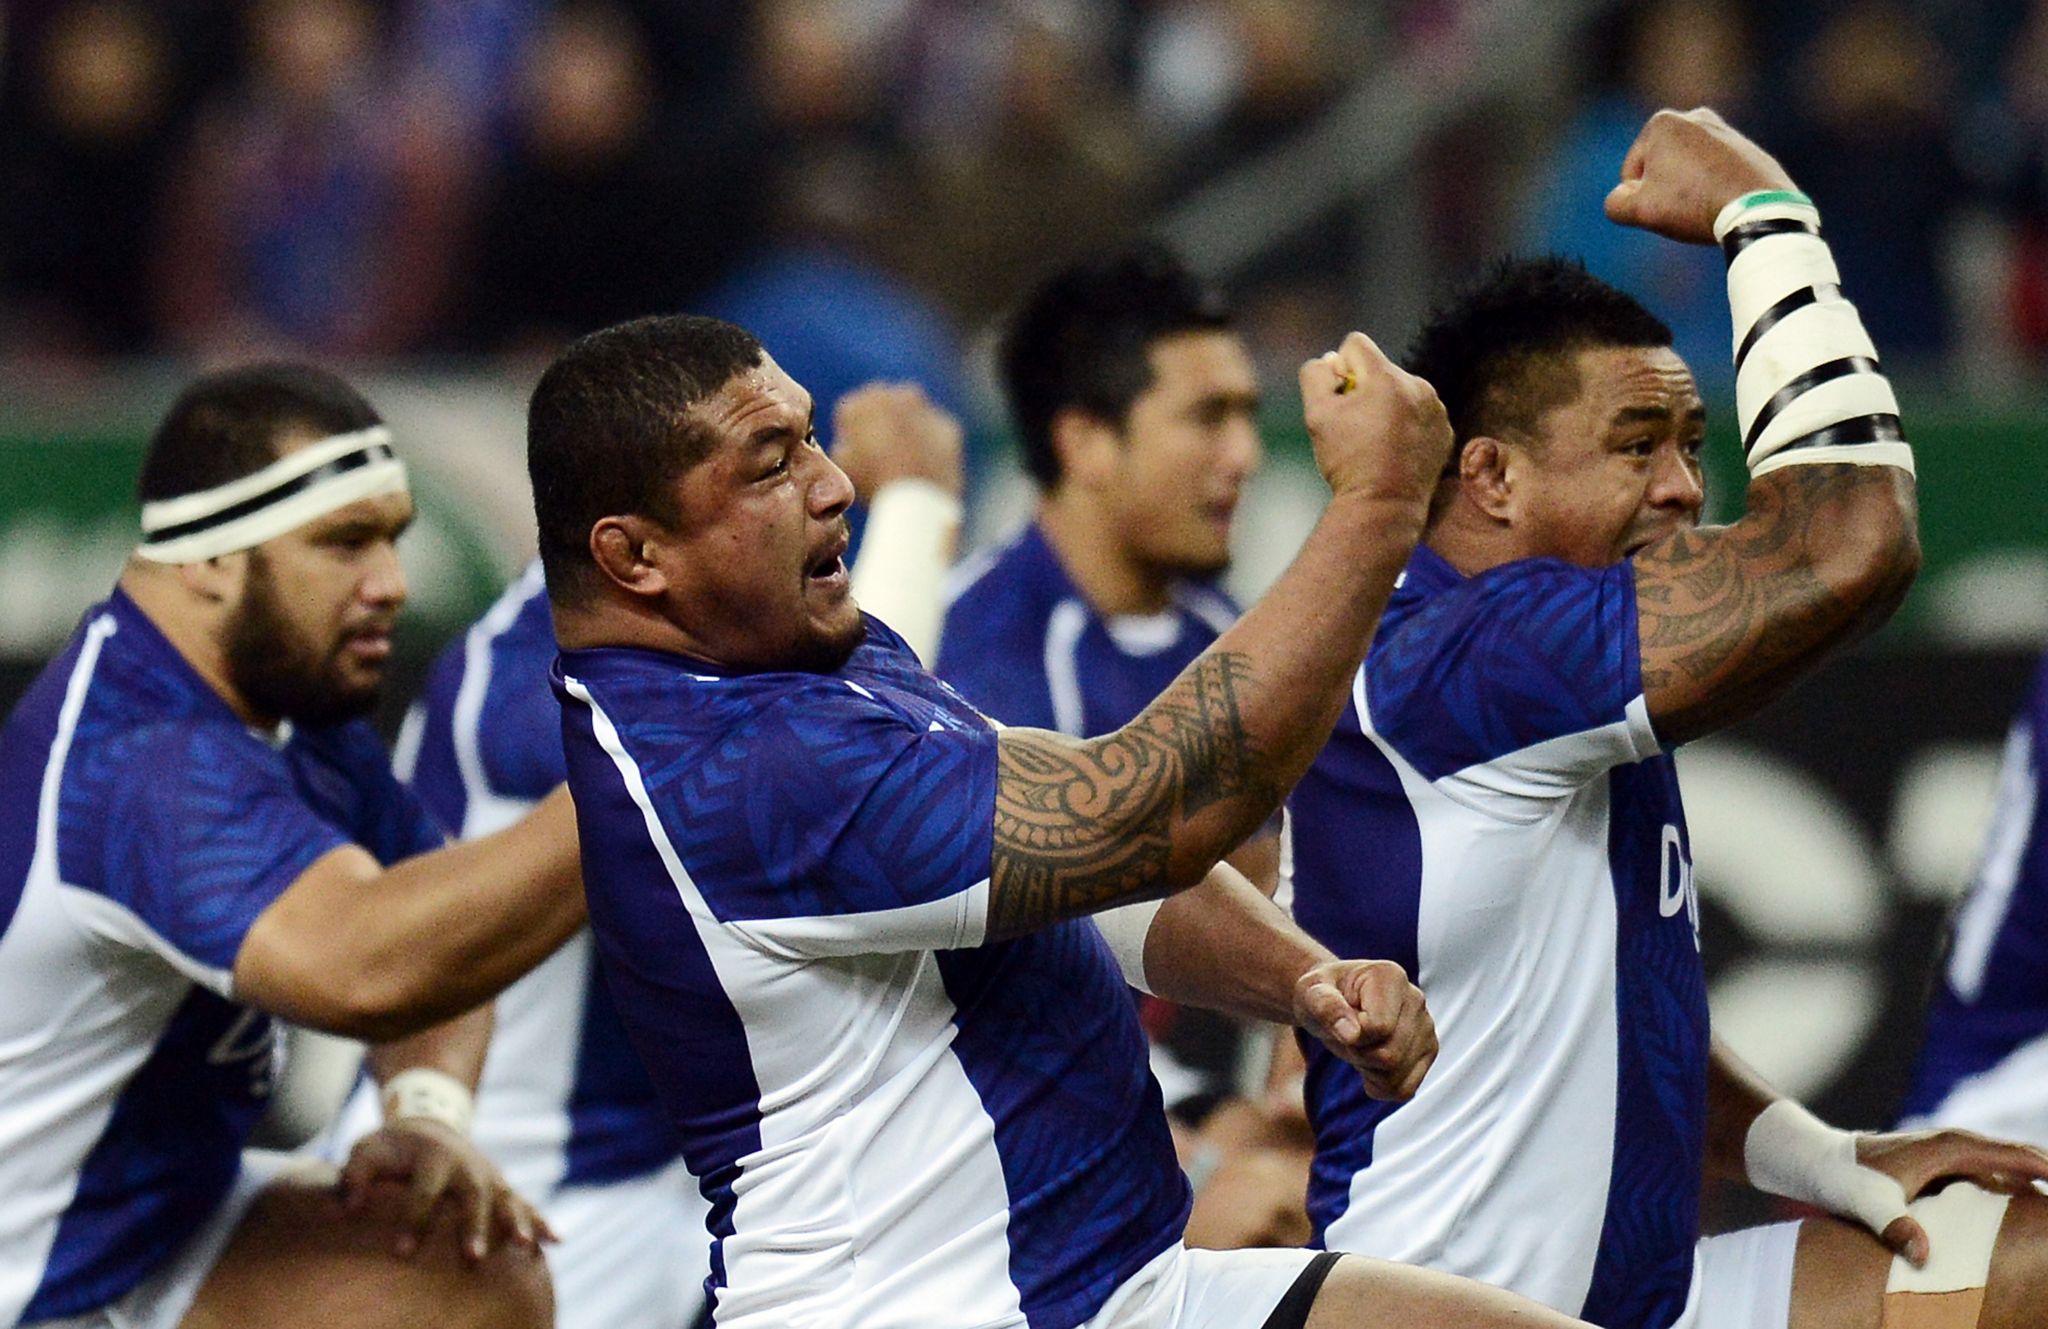 Samoa's players perform the haka during the rugby union Test match France vs Samoa at the Stade de France on November 24, 2012 in Saint-Denis, north of Paris